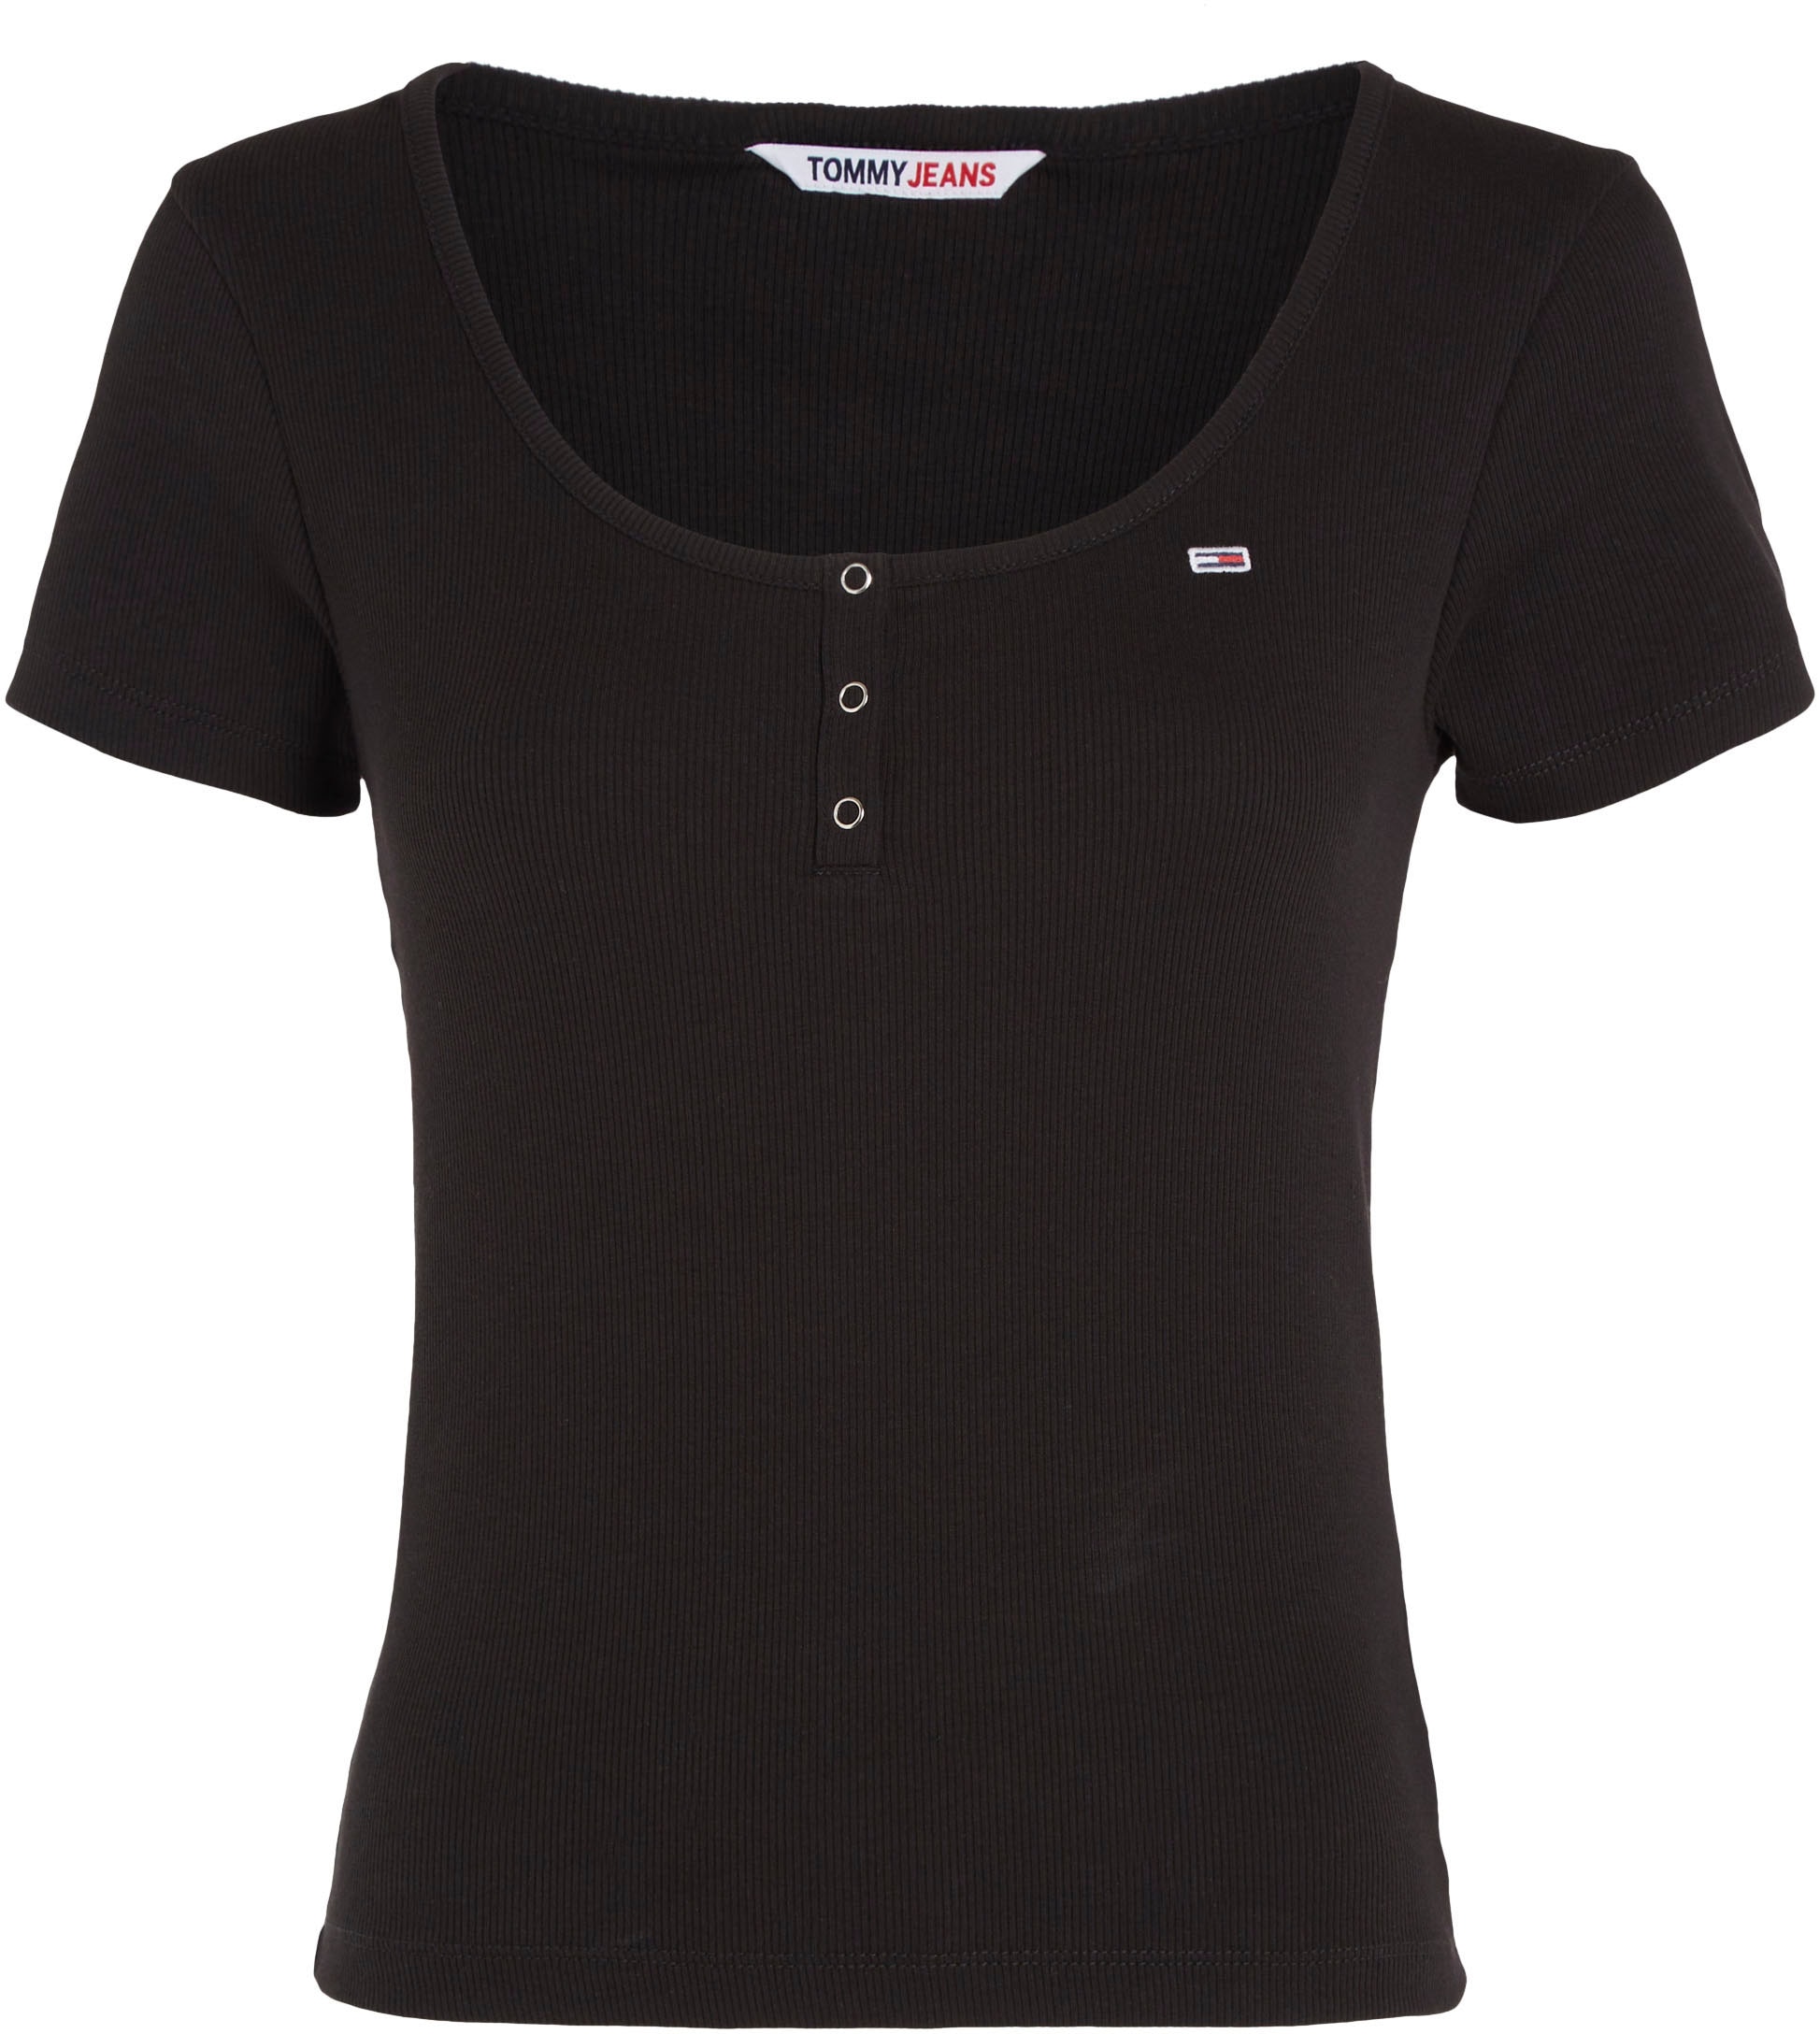 Tommy Jeans T-Shirt Jeans BUTTON Logostickerei mit »TJW ♕ BBY Tommy bei C-NECK«, RIB